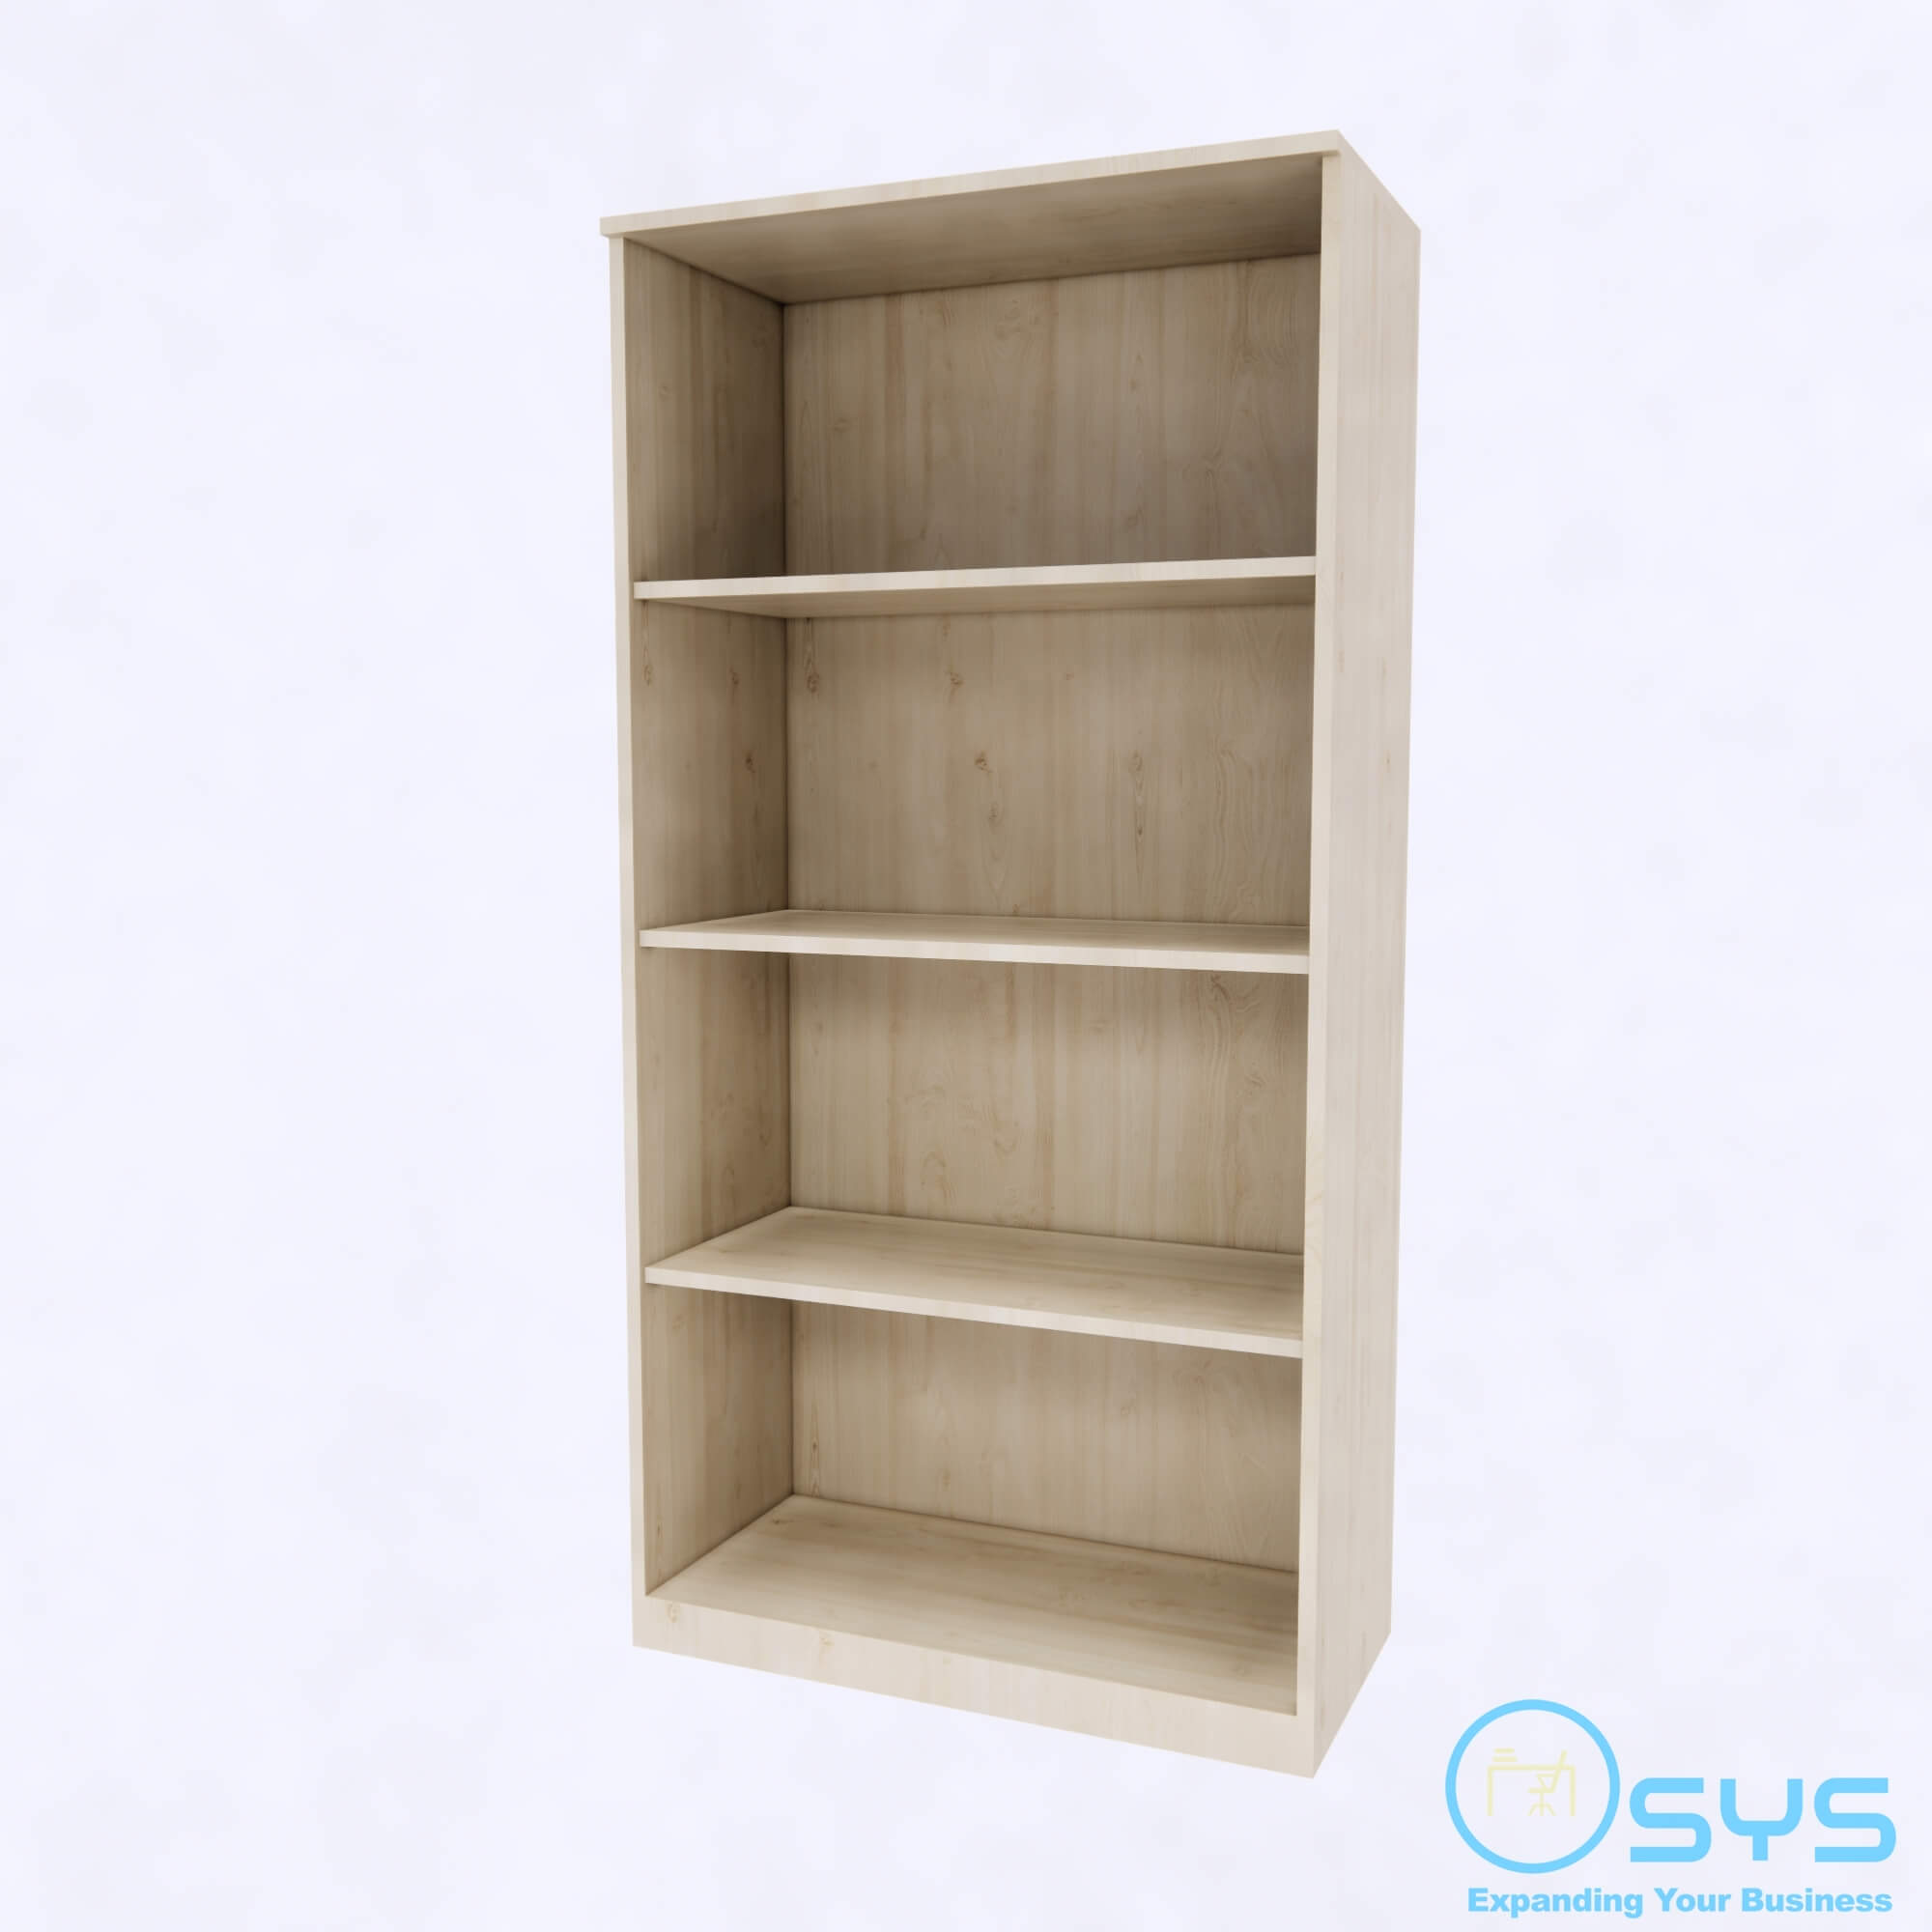 Wooden Cabinet 008-2